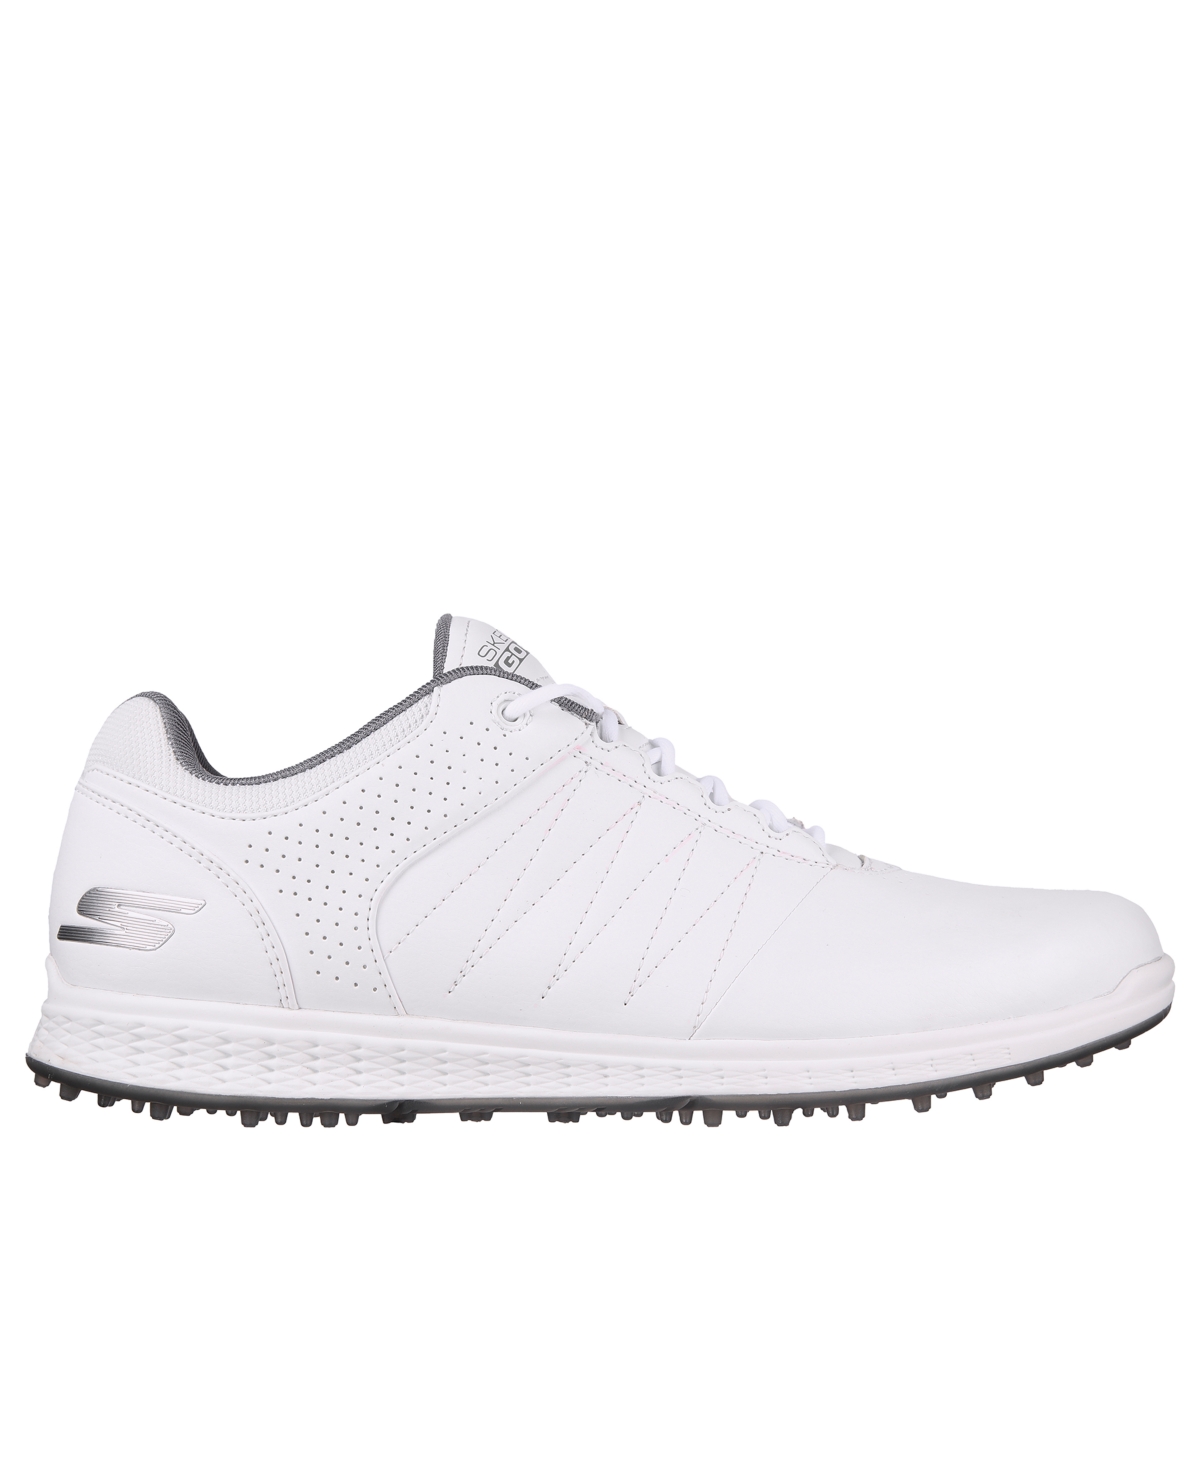 Shop Skechers Men's Go Golf Pivot Golf Sneakers From Finish Line In White,silver Grey